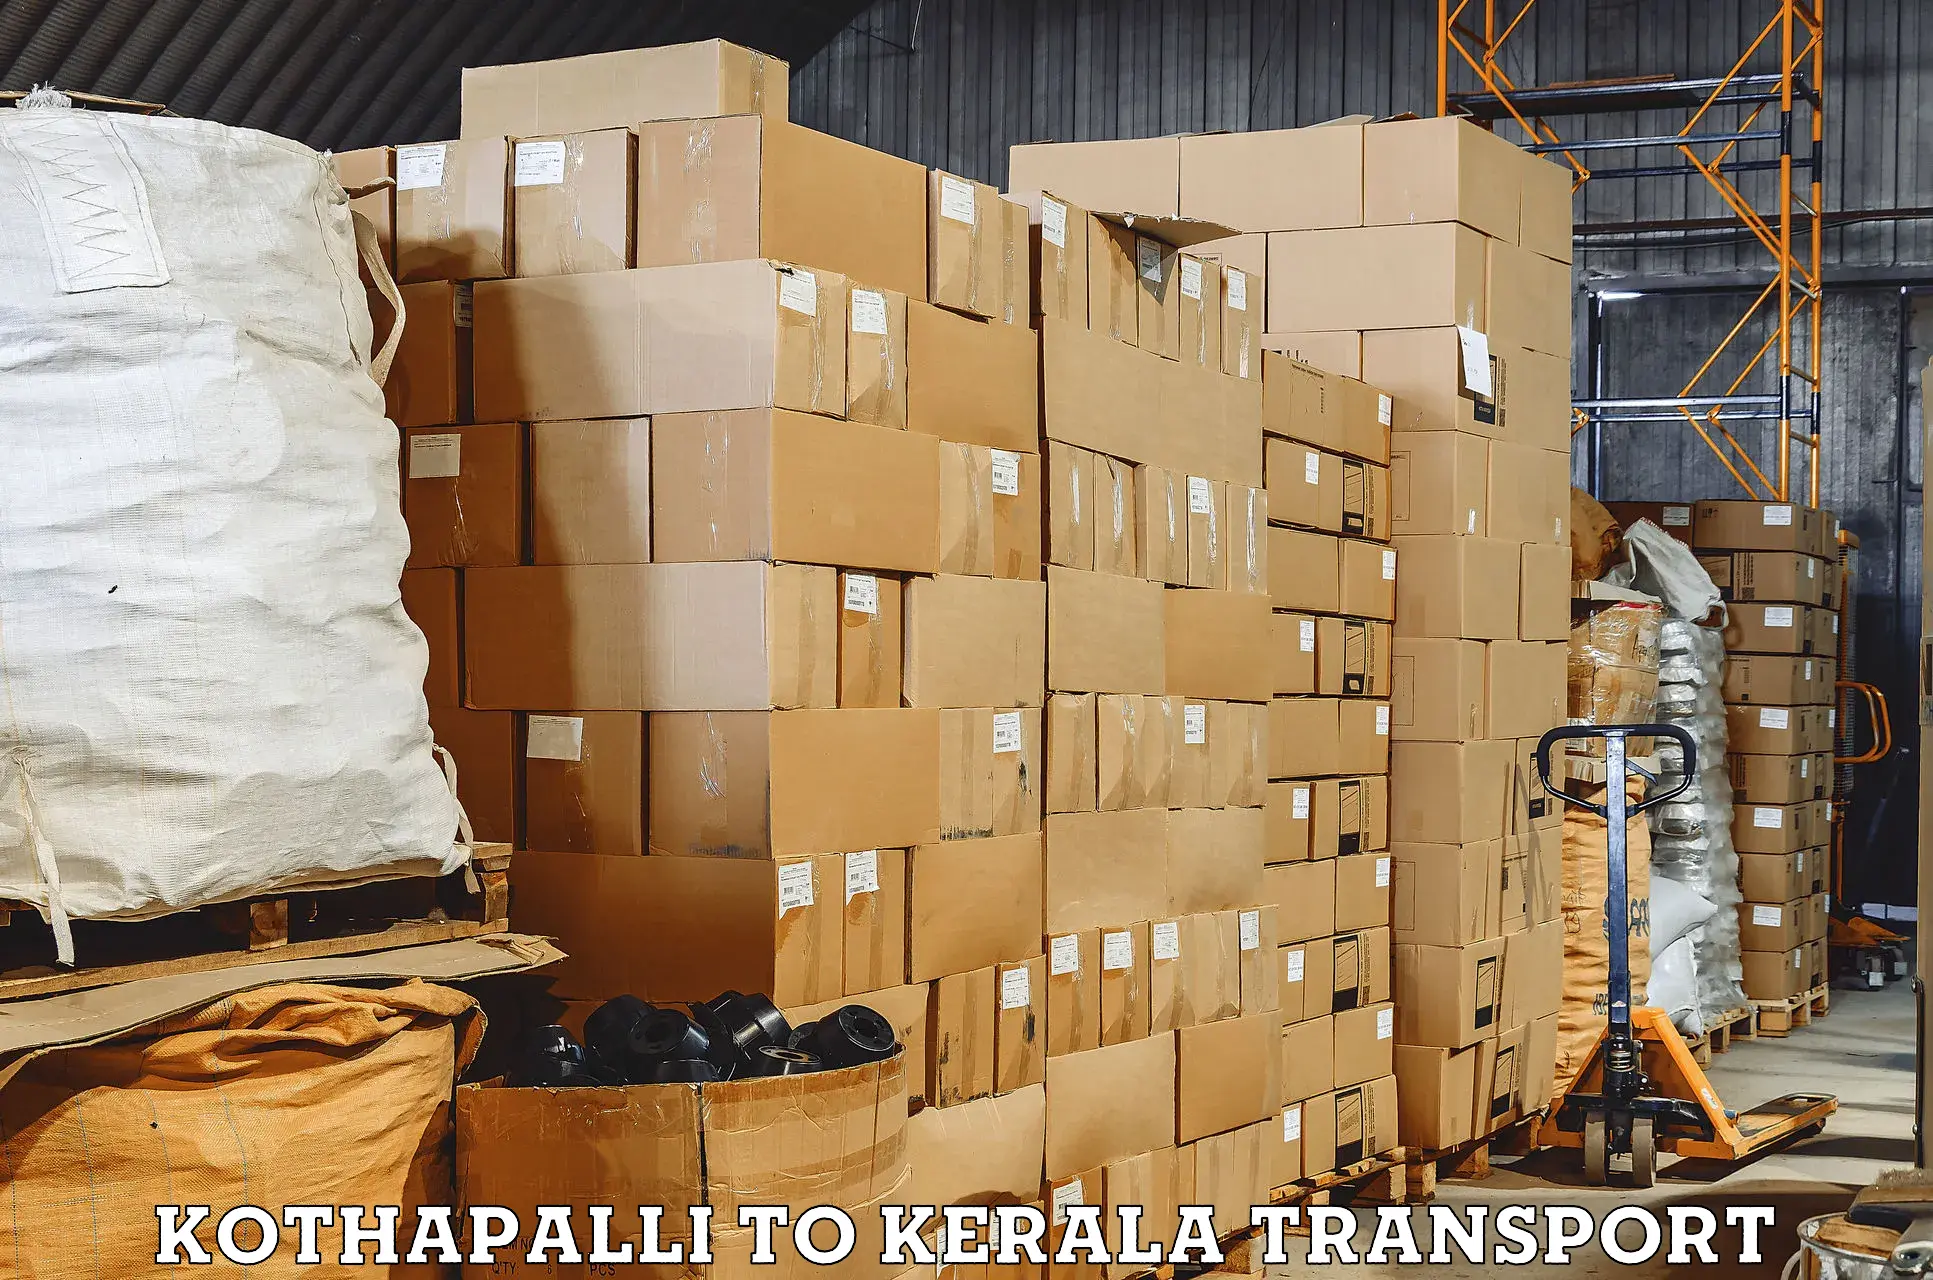 Transport bike from one state to another Kothapalli to Vadakara